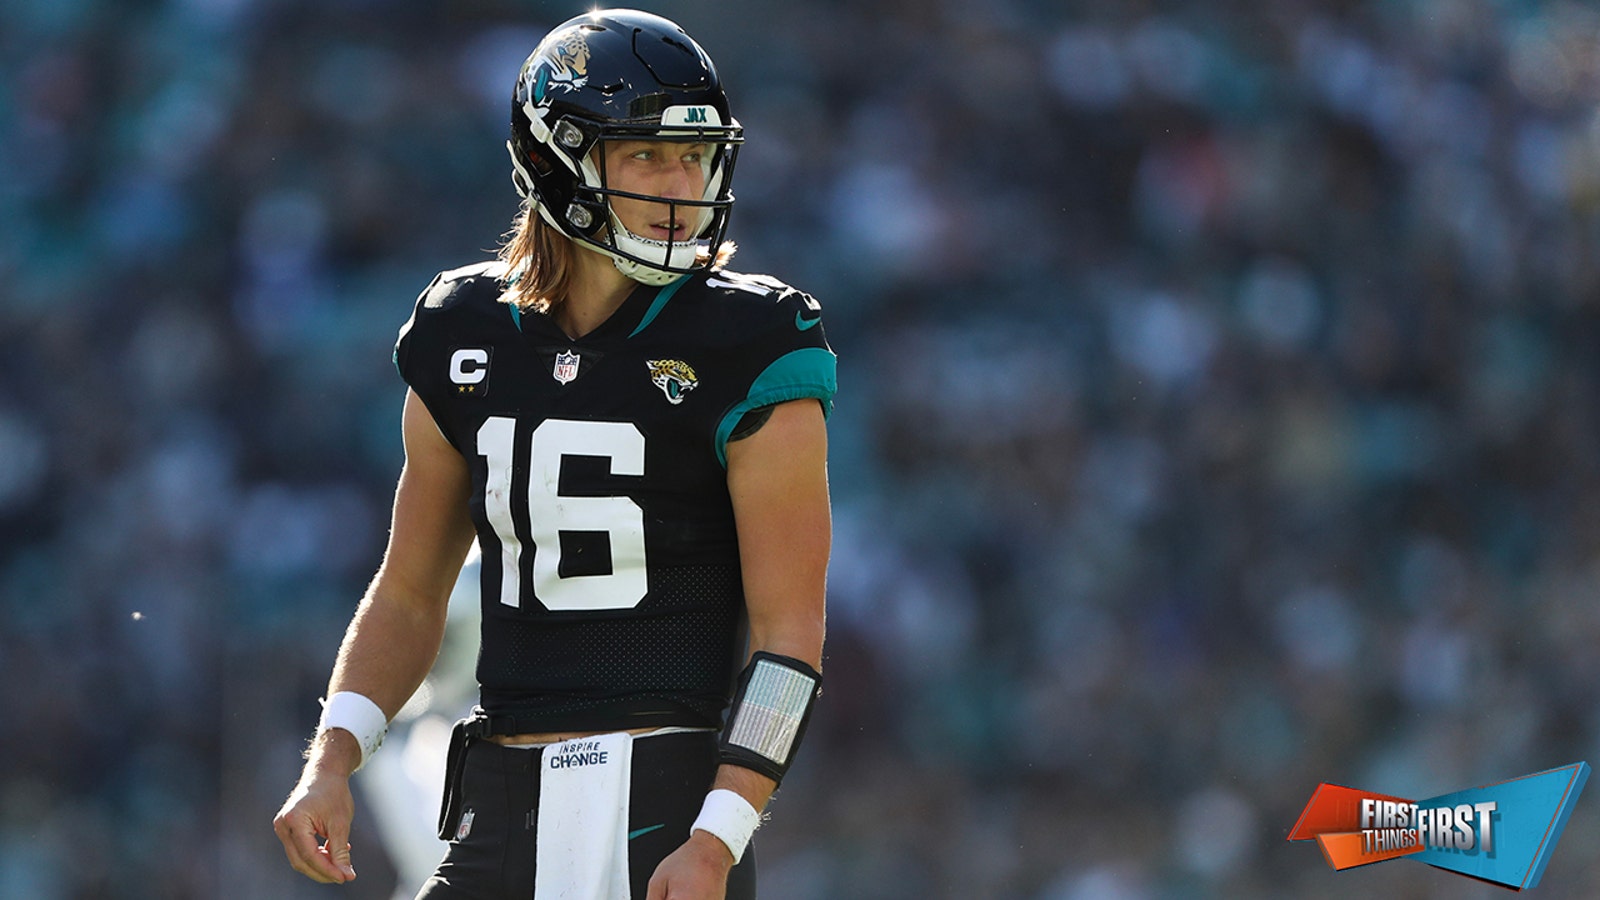 Doug Pederson on Trevor Lawrence: "You can put the team on his back."